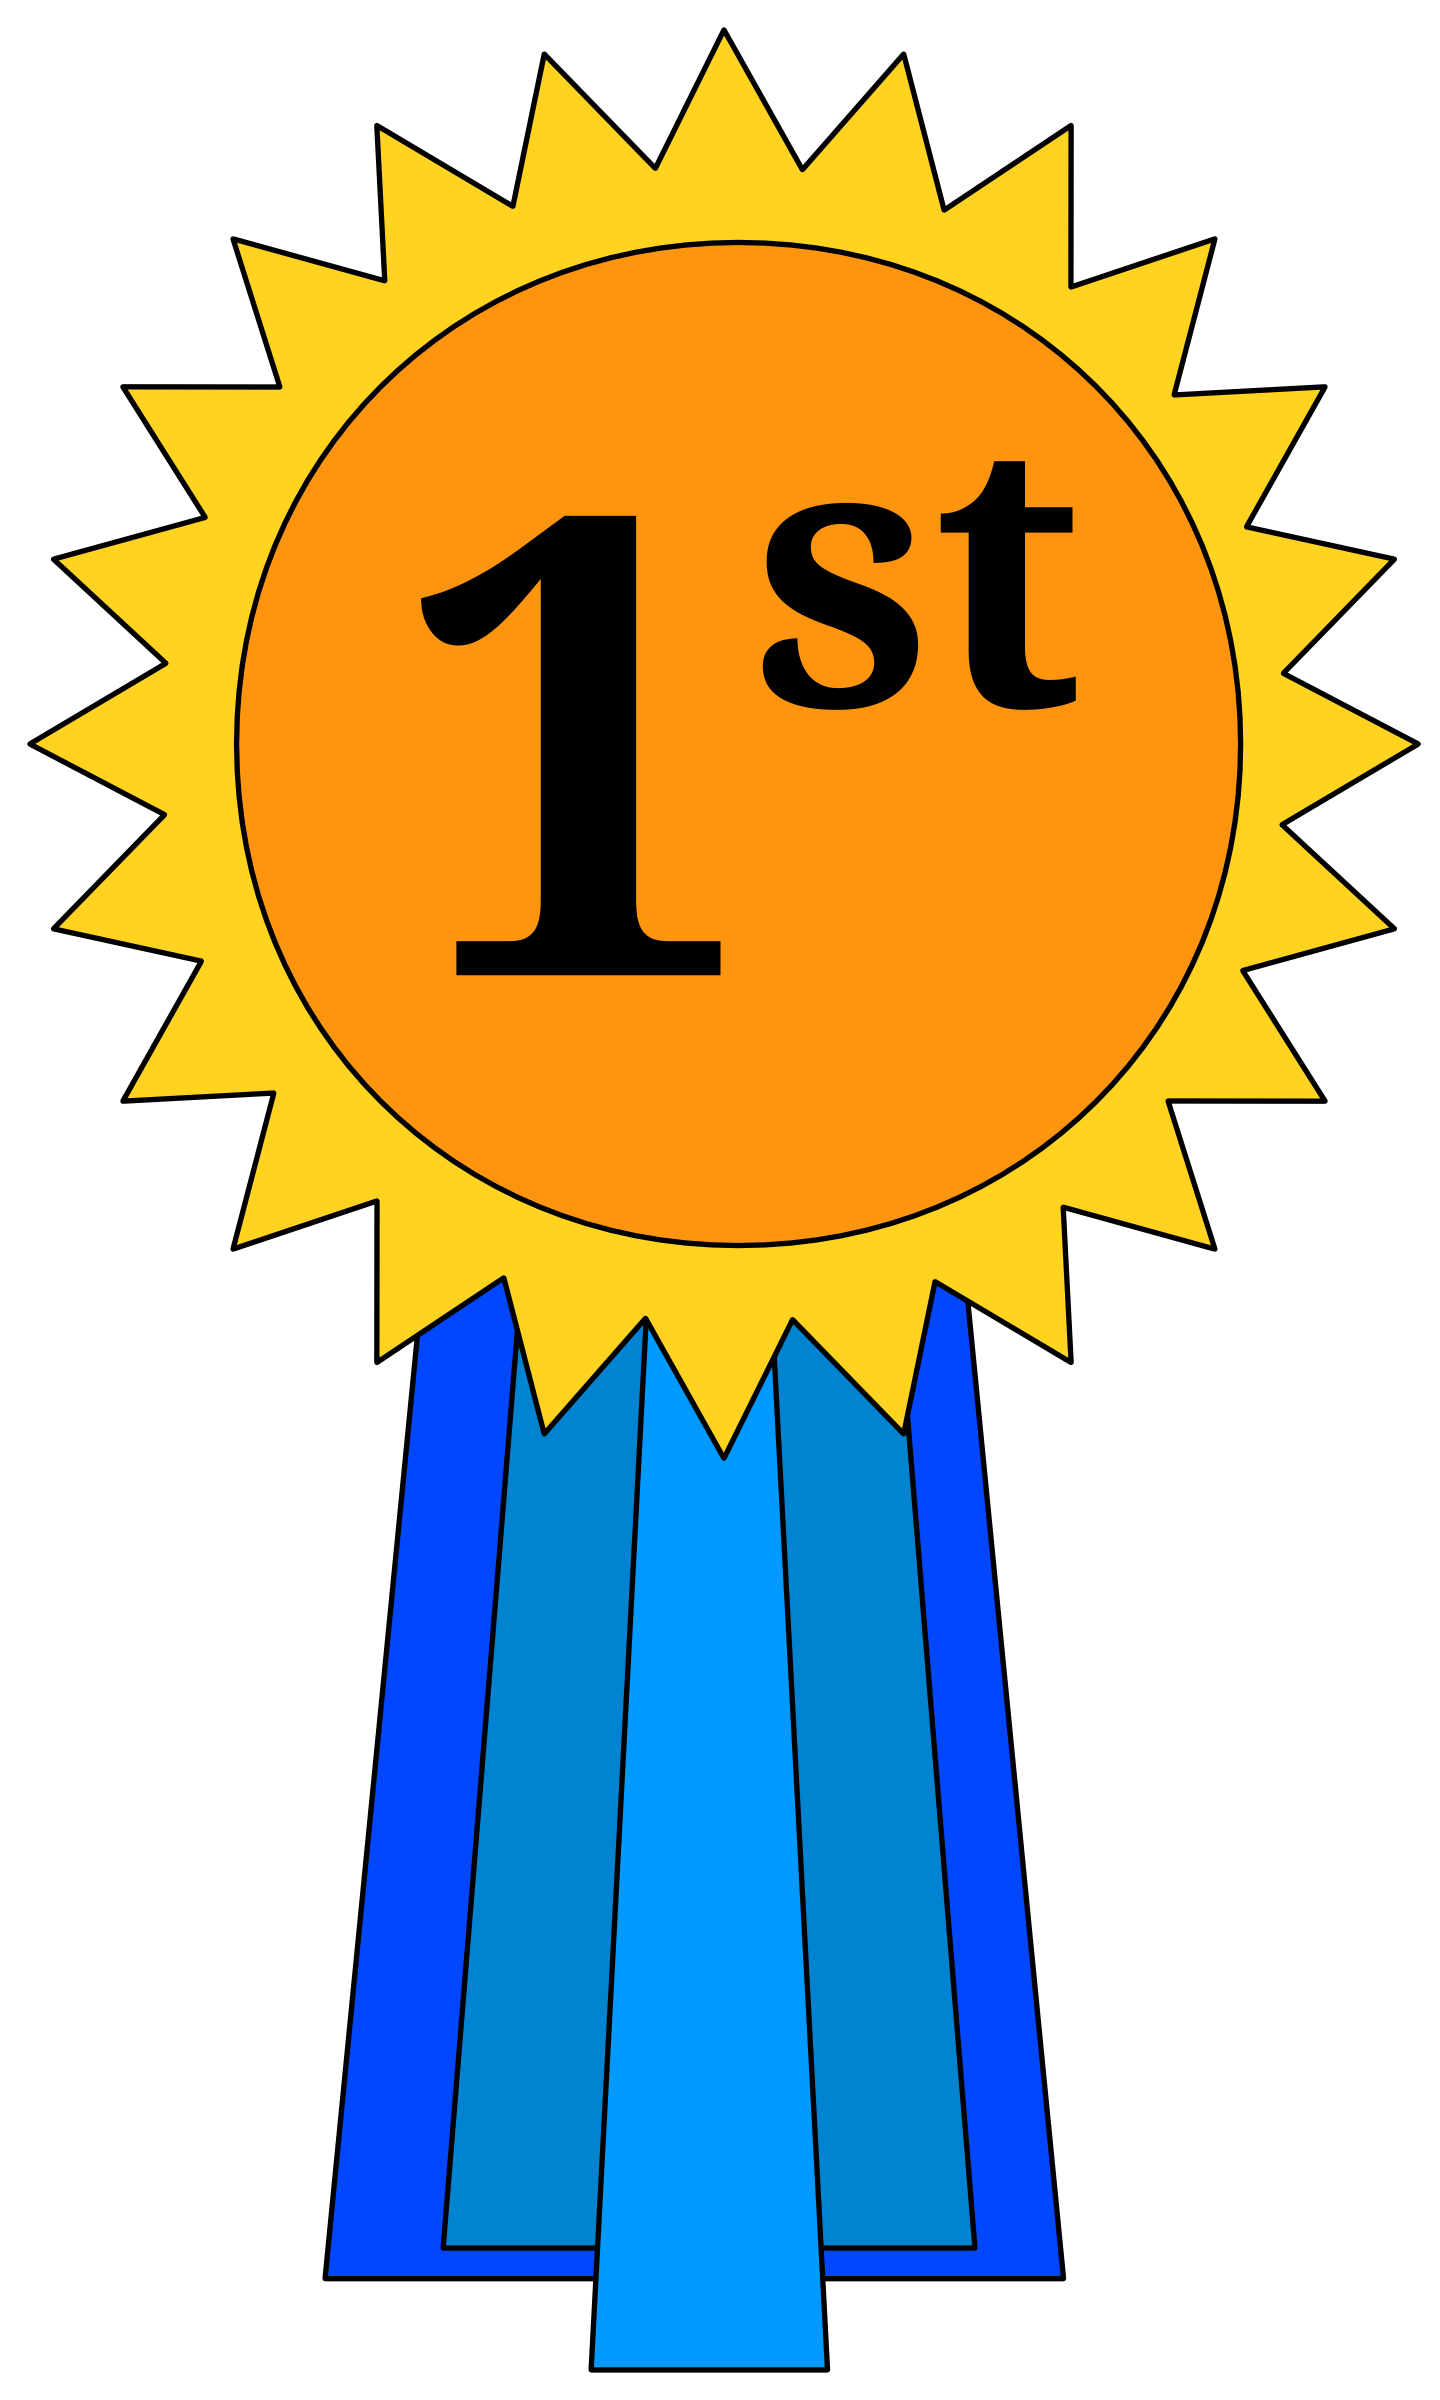 award-clipart-1st-place-pictures-on-cliparts-pub-2020